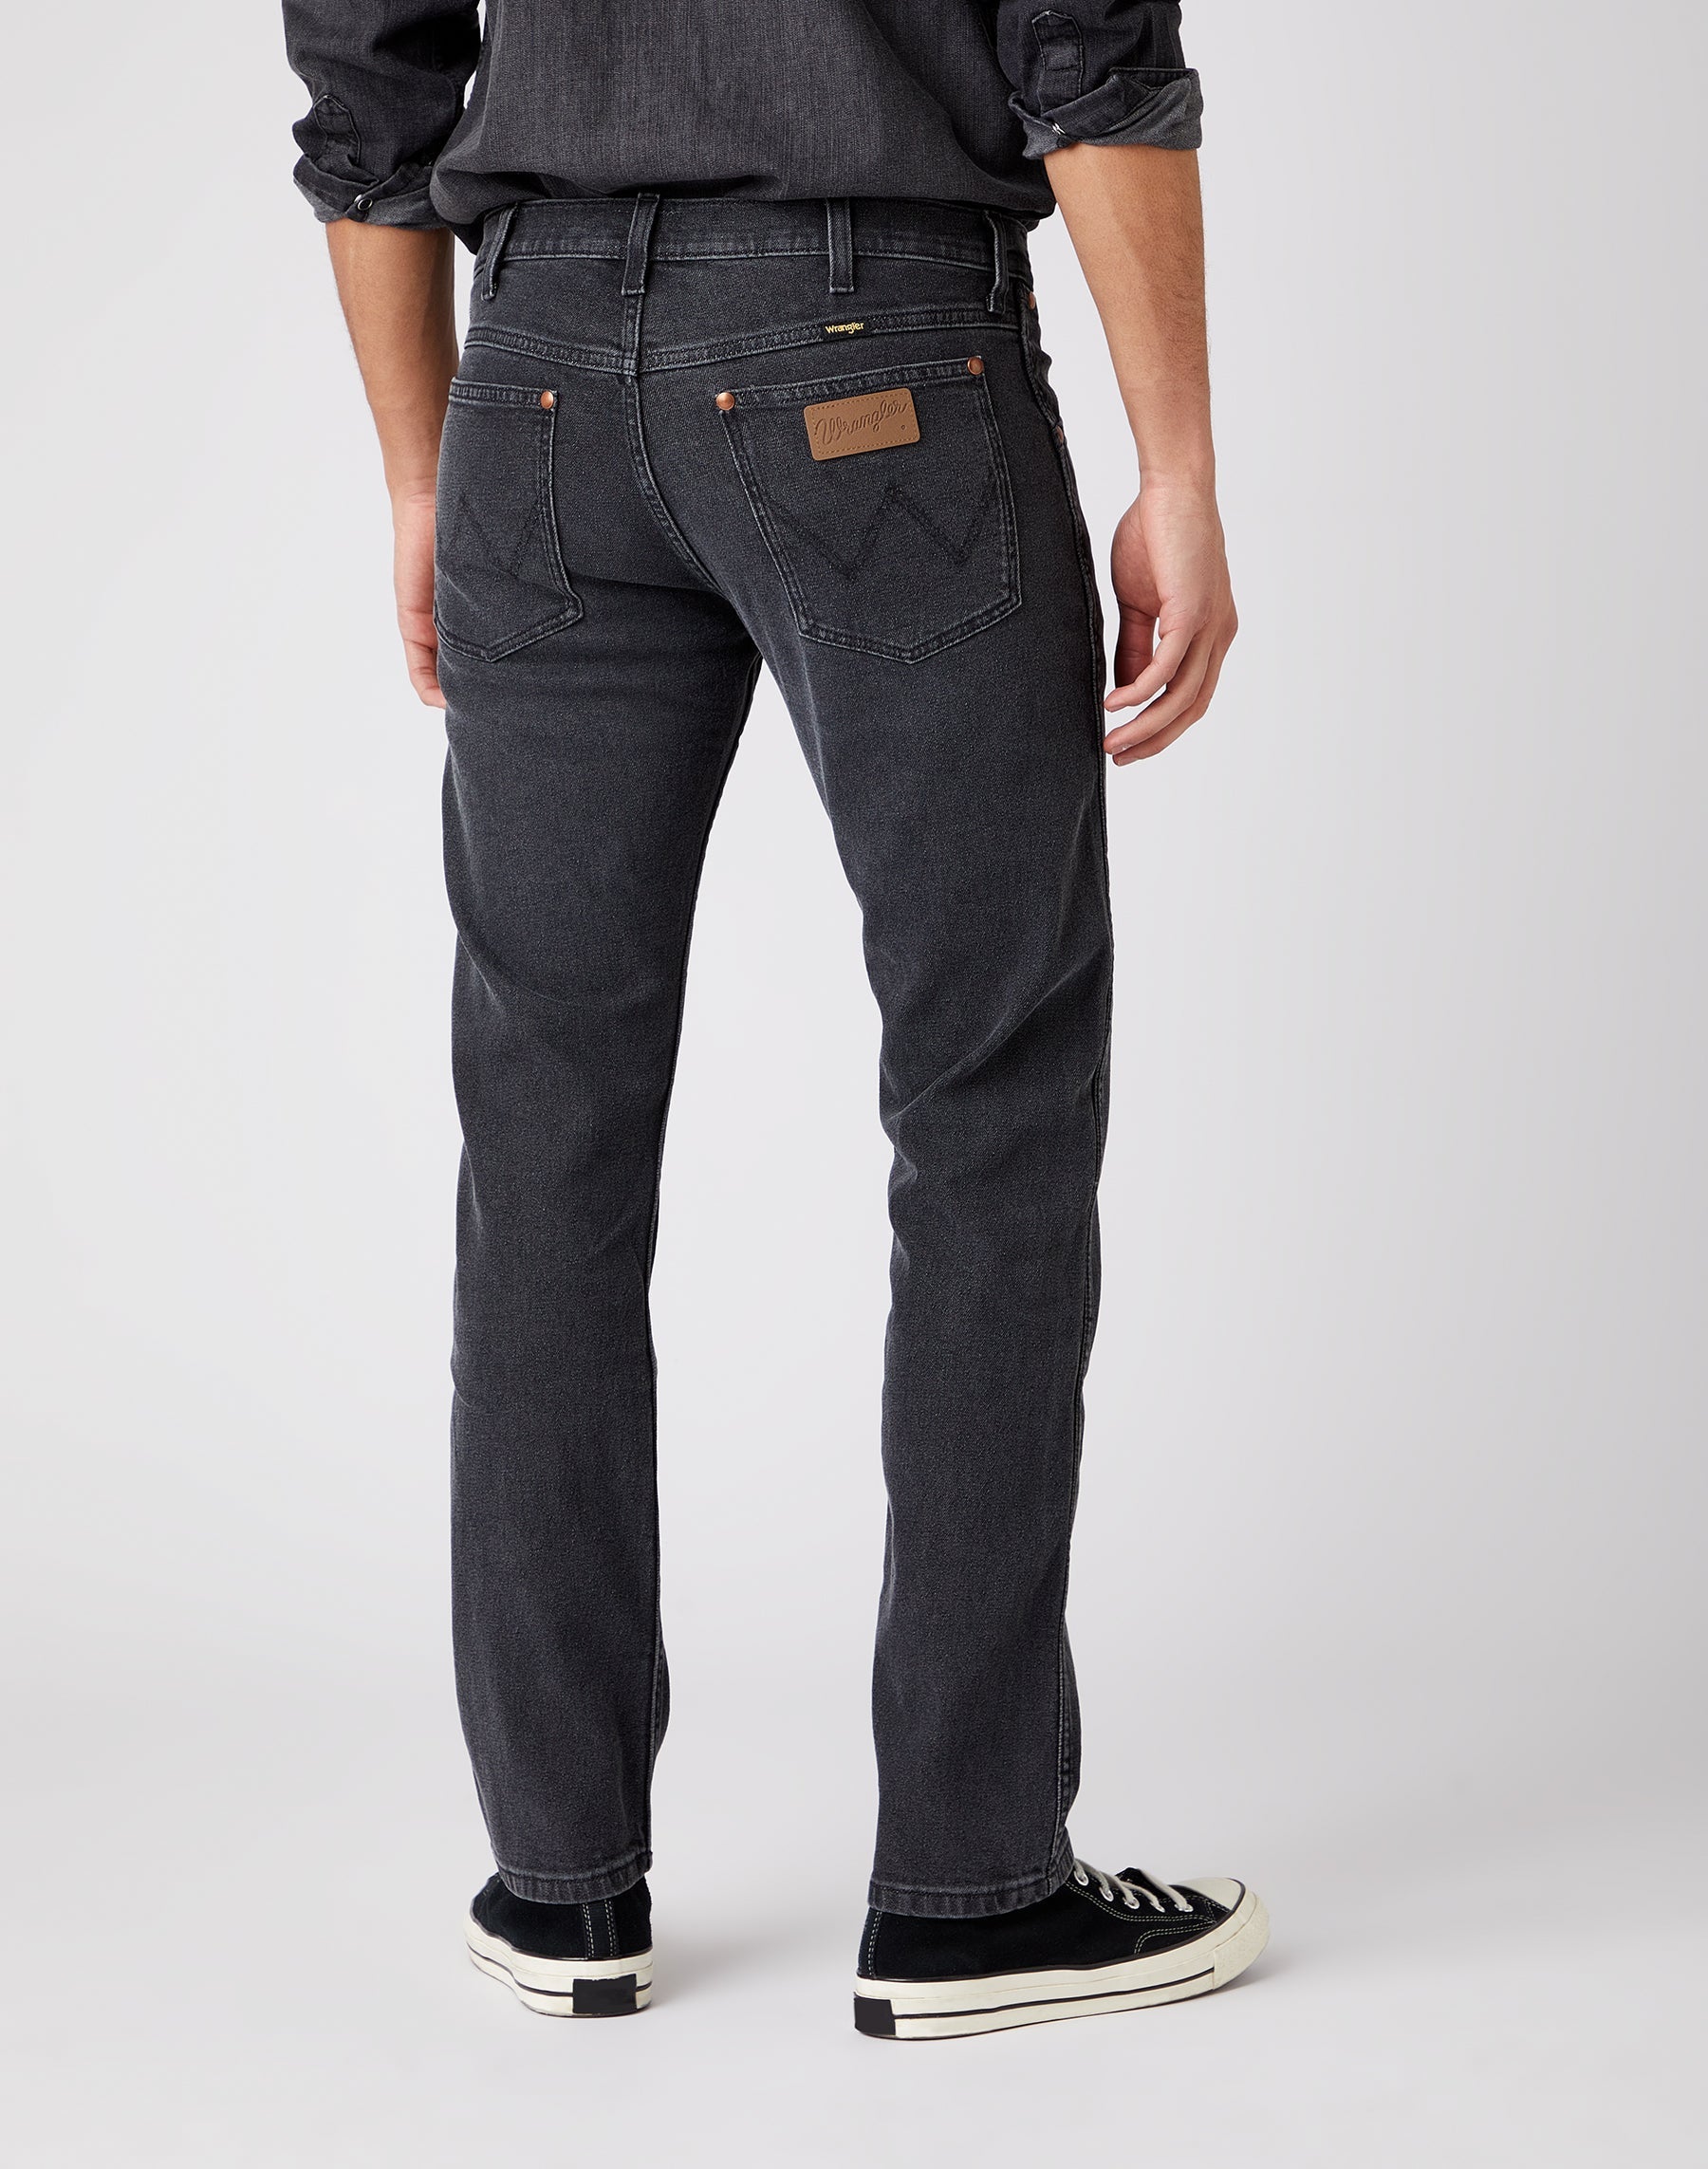 Indigood Icons 11MWZ Western Slim Jeans in Black Ace Jeans Wrangler   